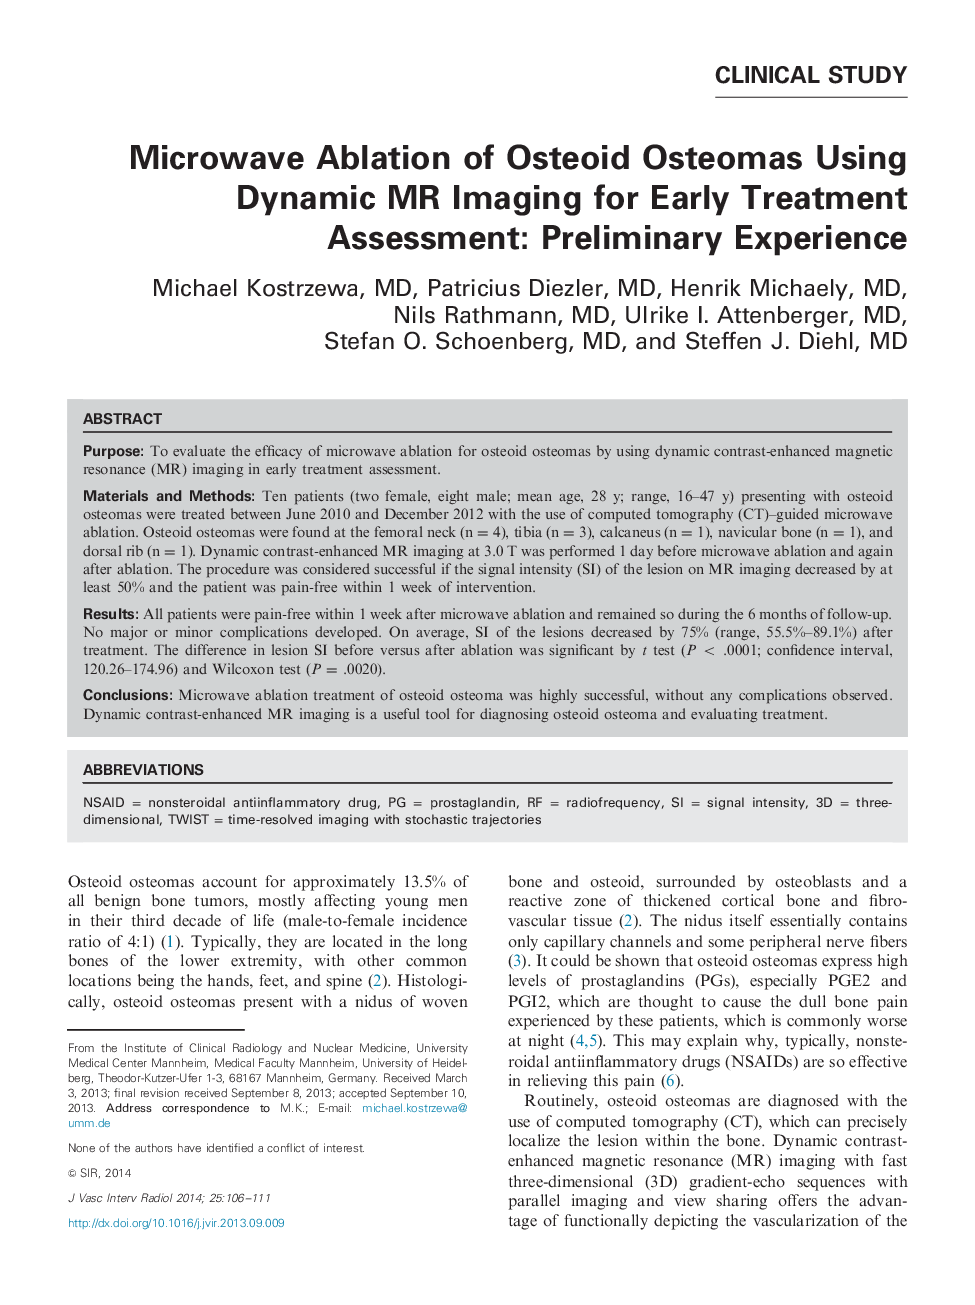 Microwave Ablation of Osteoid Osteomas Using Dynamic MR Imaging for Early Treatment Assessment: Preliminary Experience